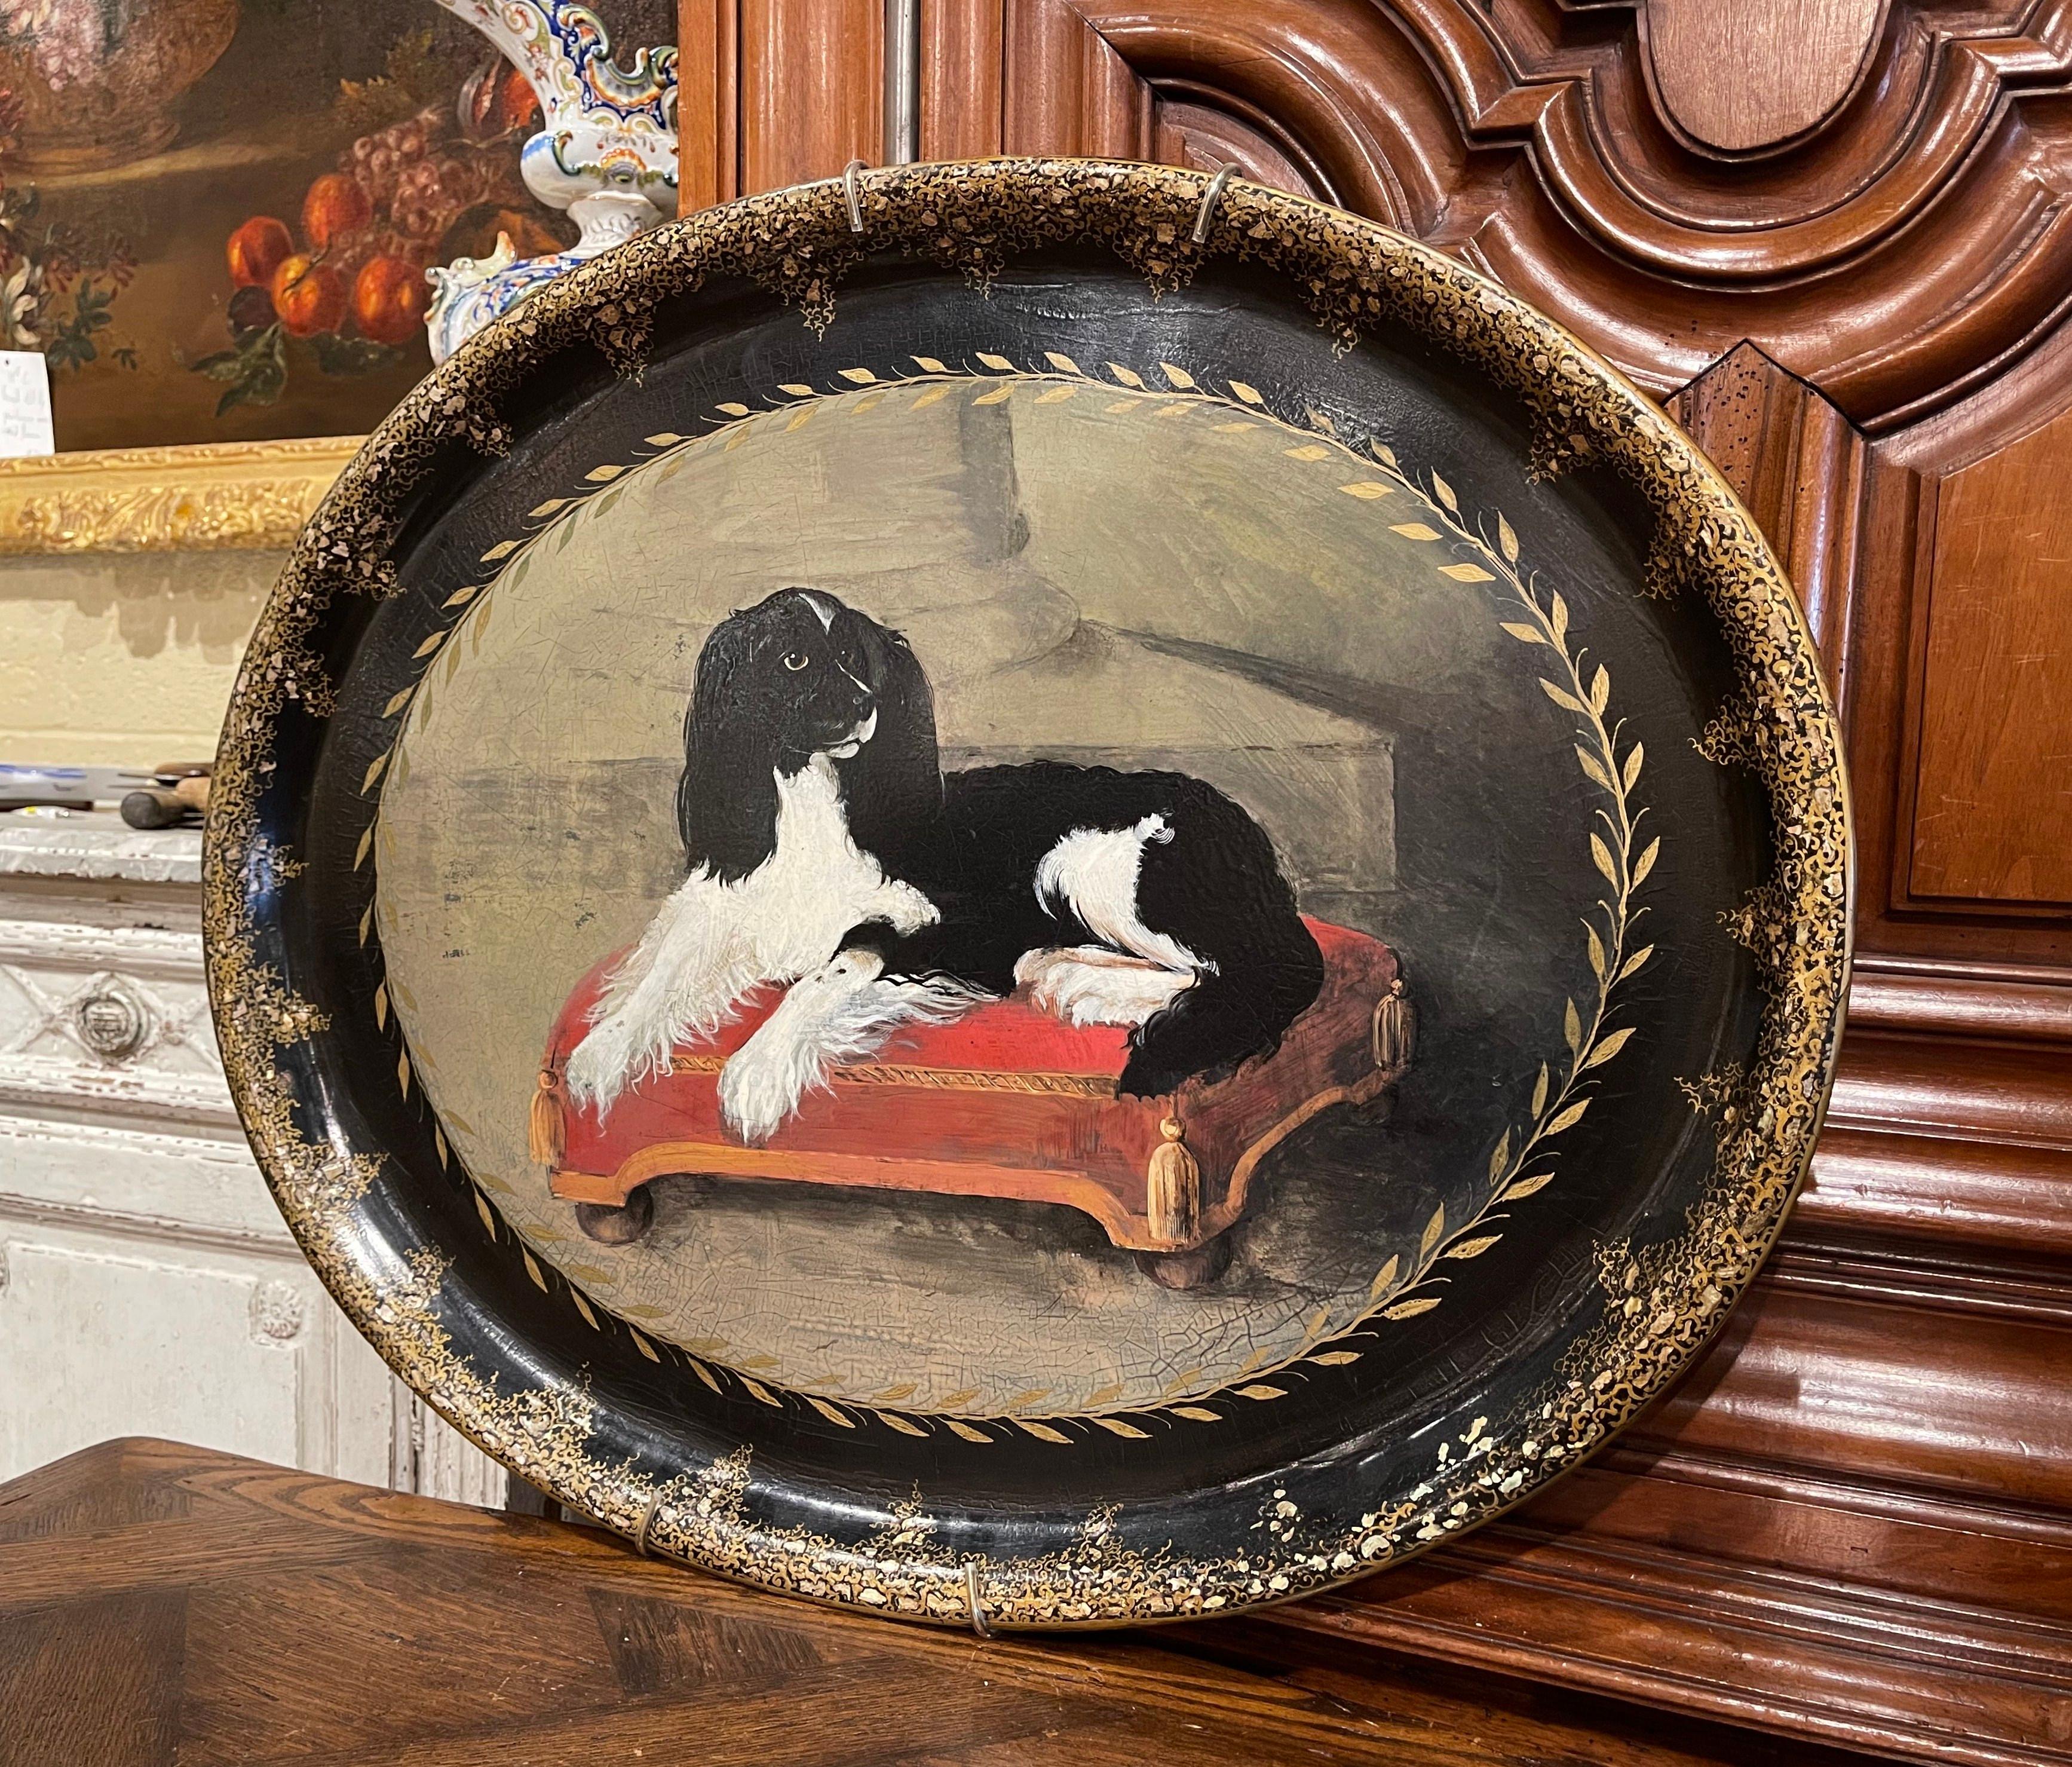 Embellish a wall with this decorative and colorful tray. Made of paper mache, the oval tray features a hand painted King Charles canine resting on a Royal pillow stool. The large wall table tray is in excellent condition with rich painted colors